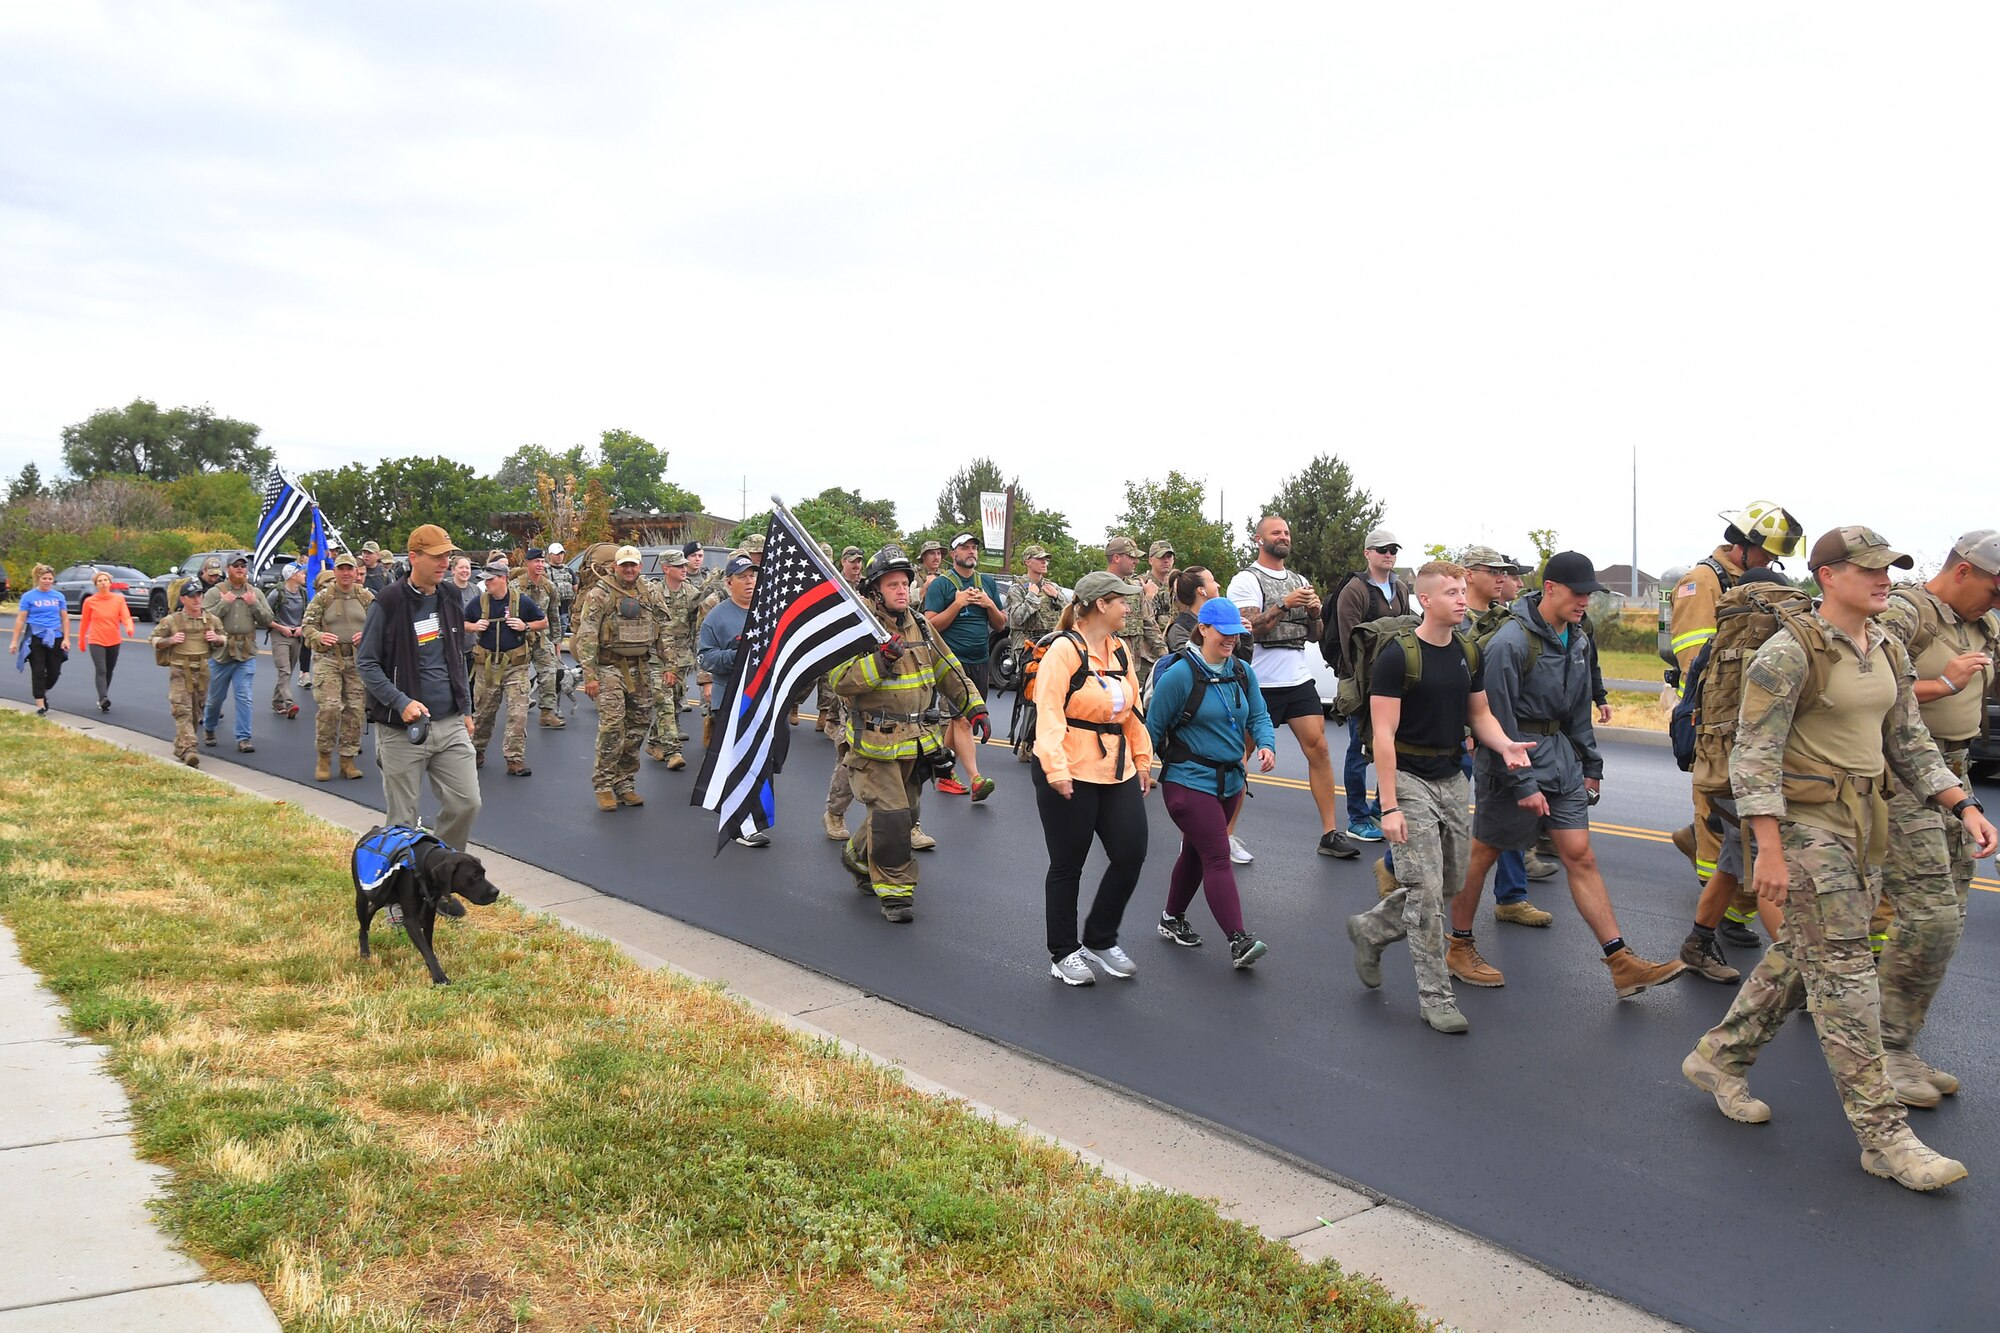 Participants begin their walk of 9.11 miles, some with 30-pound packs or firefighter gear, during 9/11 Memorial Ruck March, in Kaysville, Utah, Sept. 11, 2019. The event was co-sponsored by Hill Air Force Base first responders and fire and police departments from Kaysville and Layton, to honor and remember the fallen from the events of Sept. 11, 2001. (U.S. Air Force photo by Todd Cromar)